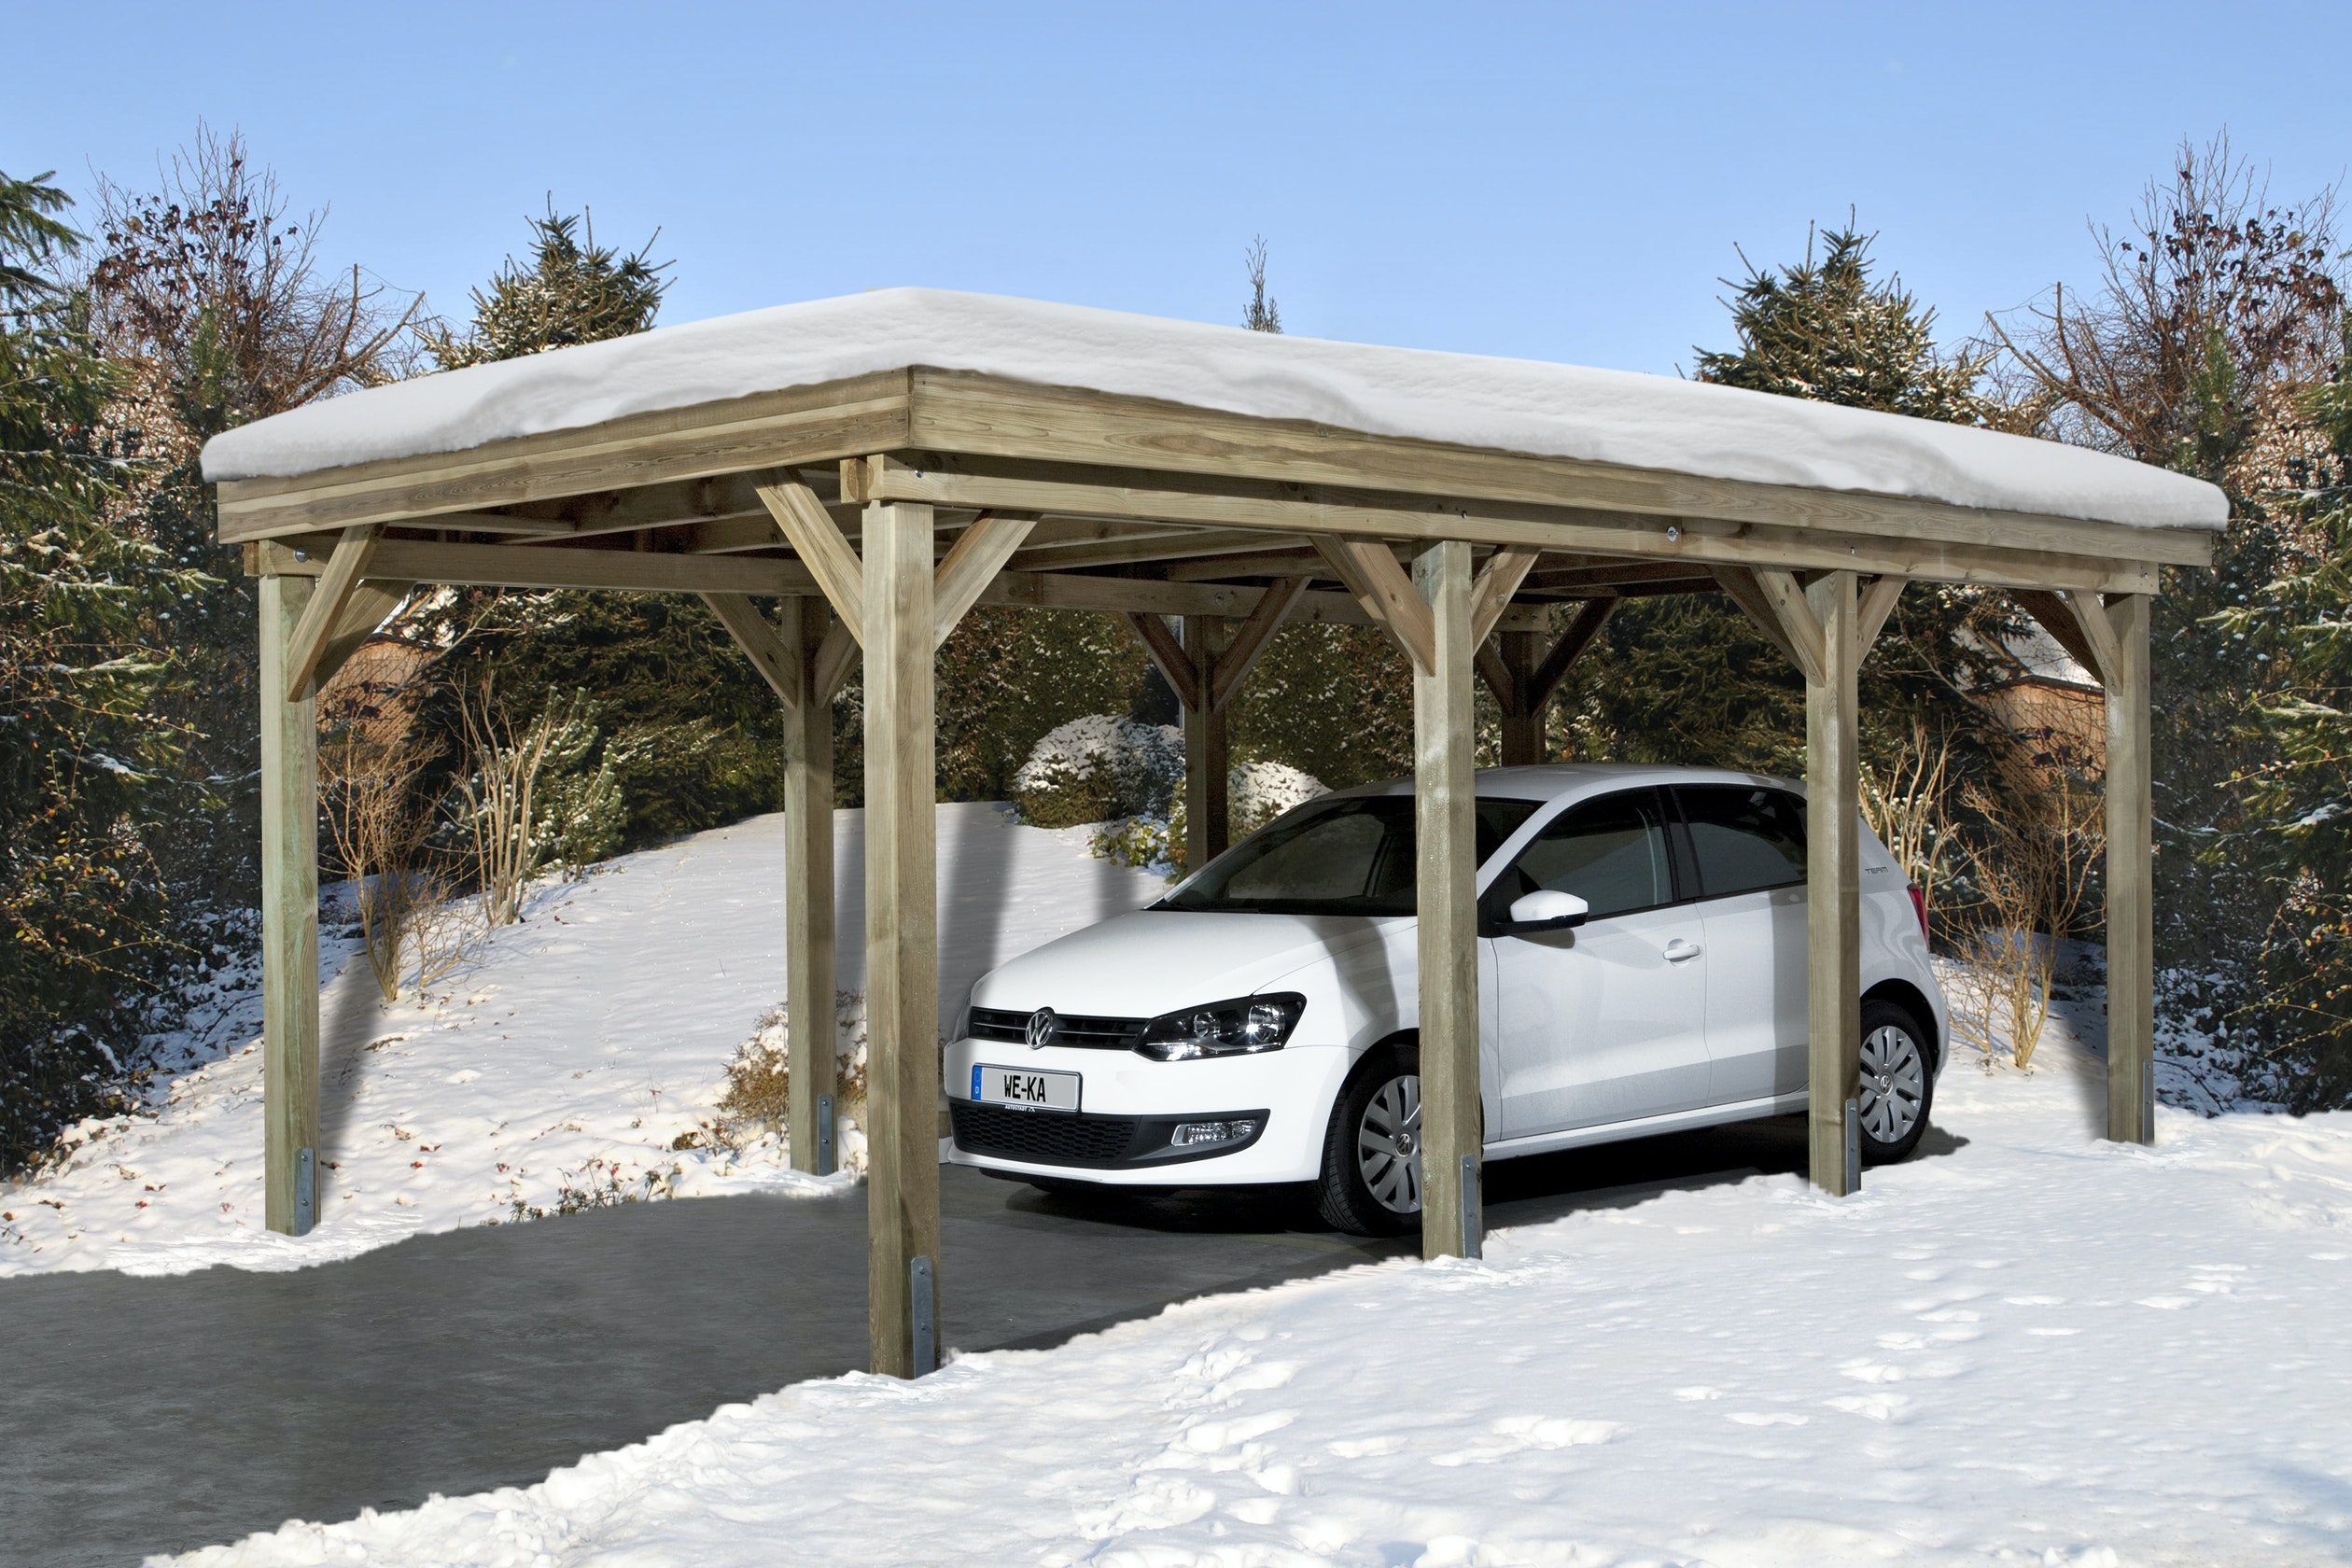 Single Winter Carport from Weka - model 609 with solid wood